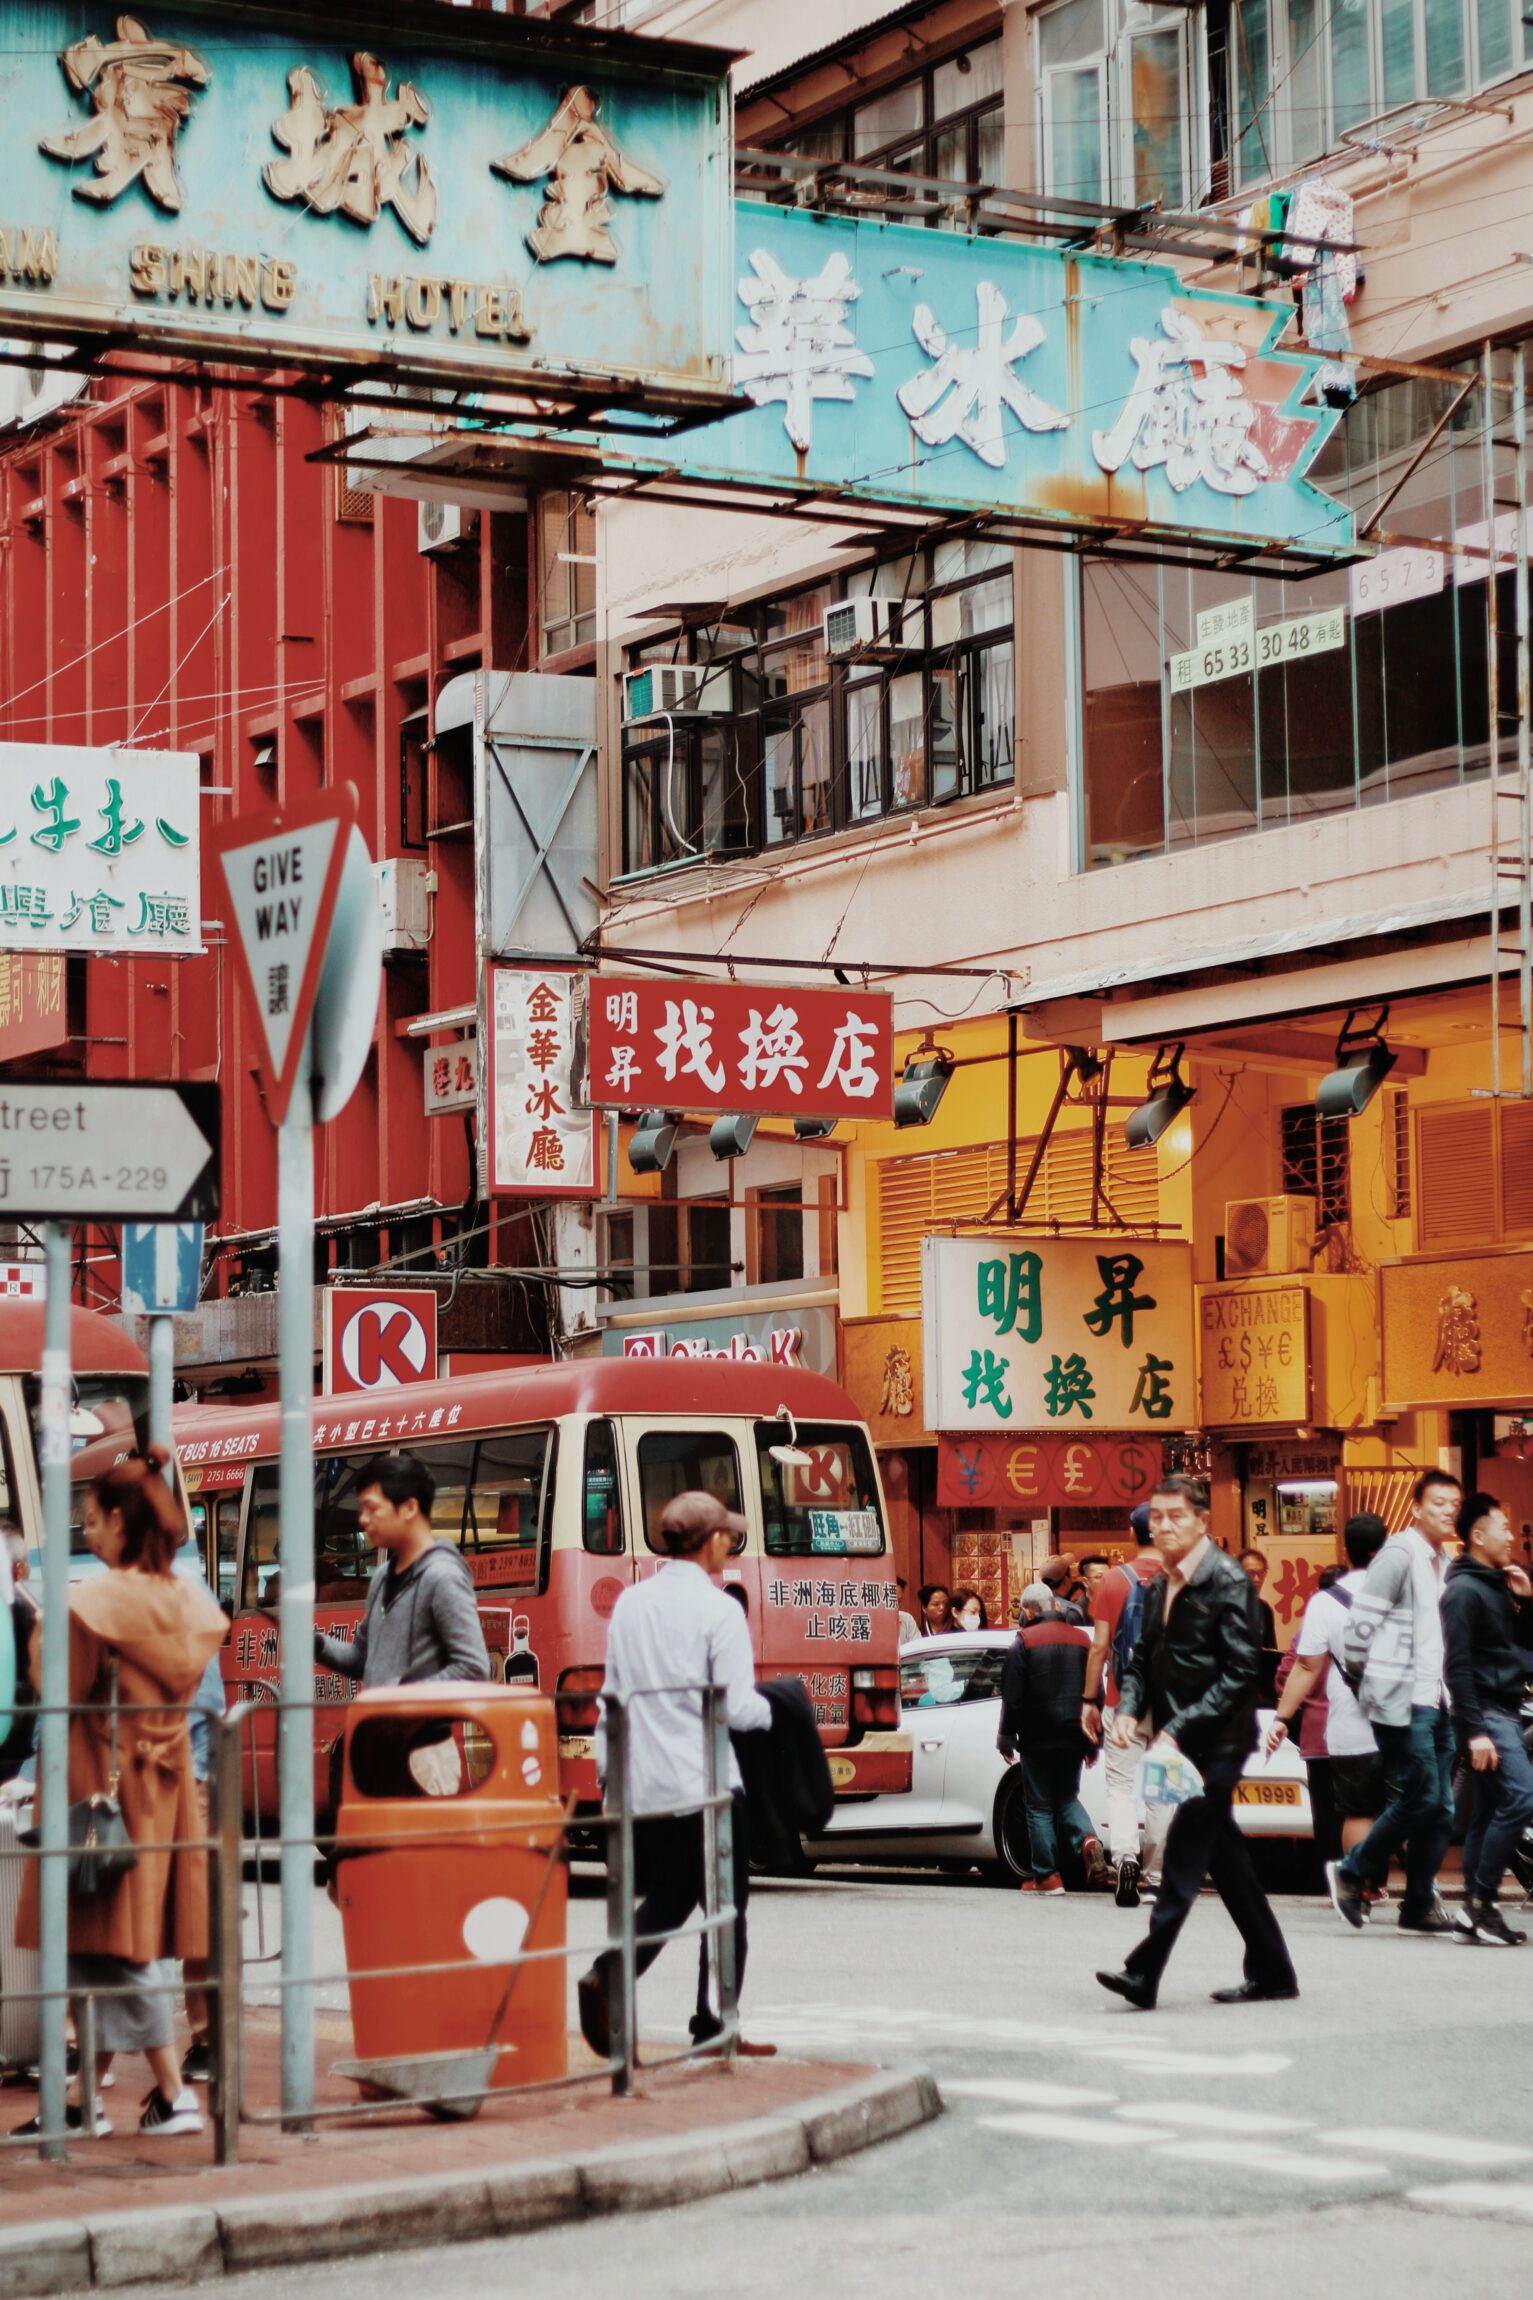 Susie Lau on Hong Kong | a busy street with store signs and people